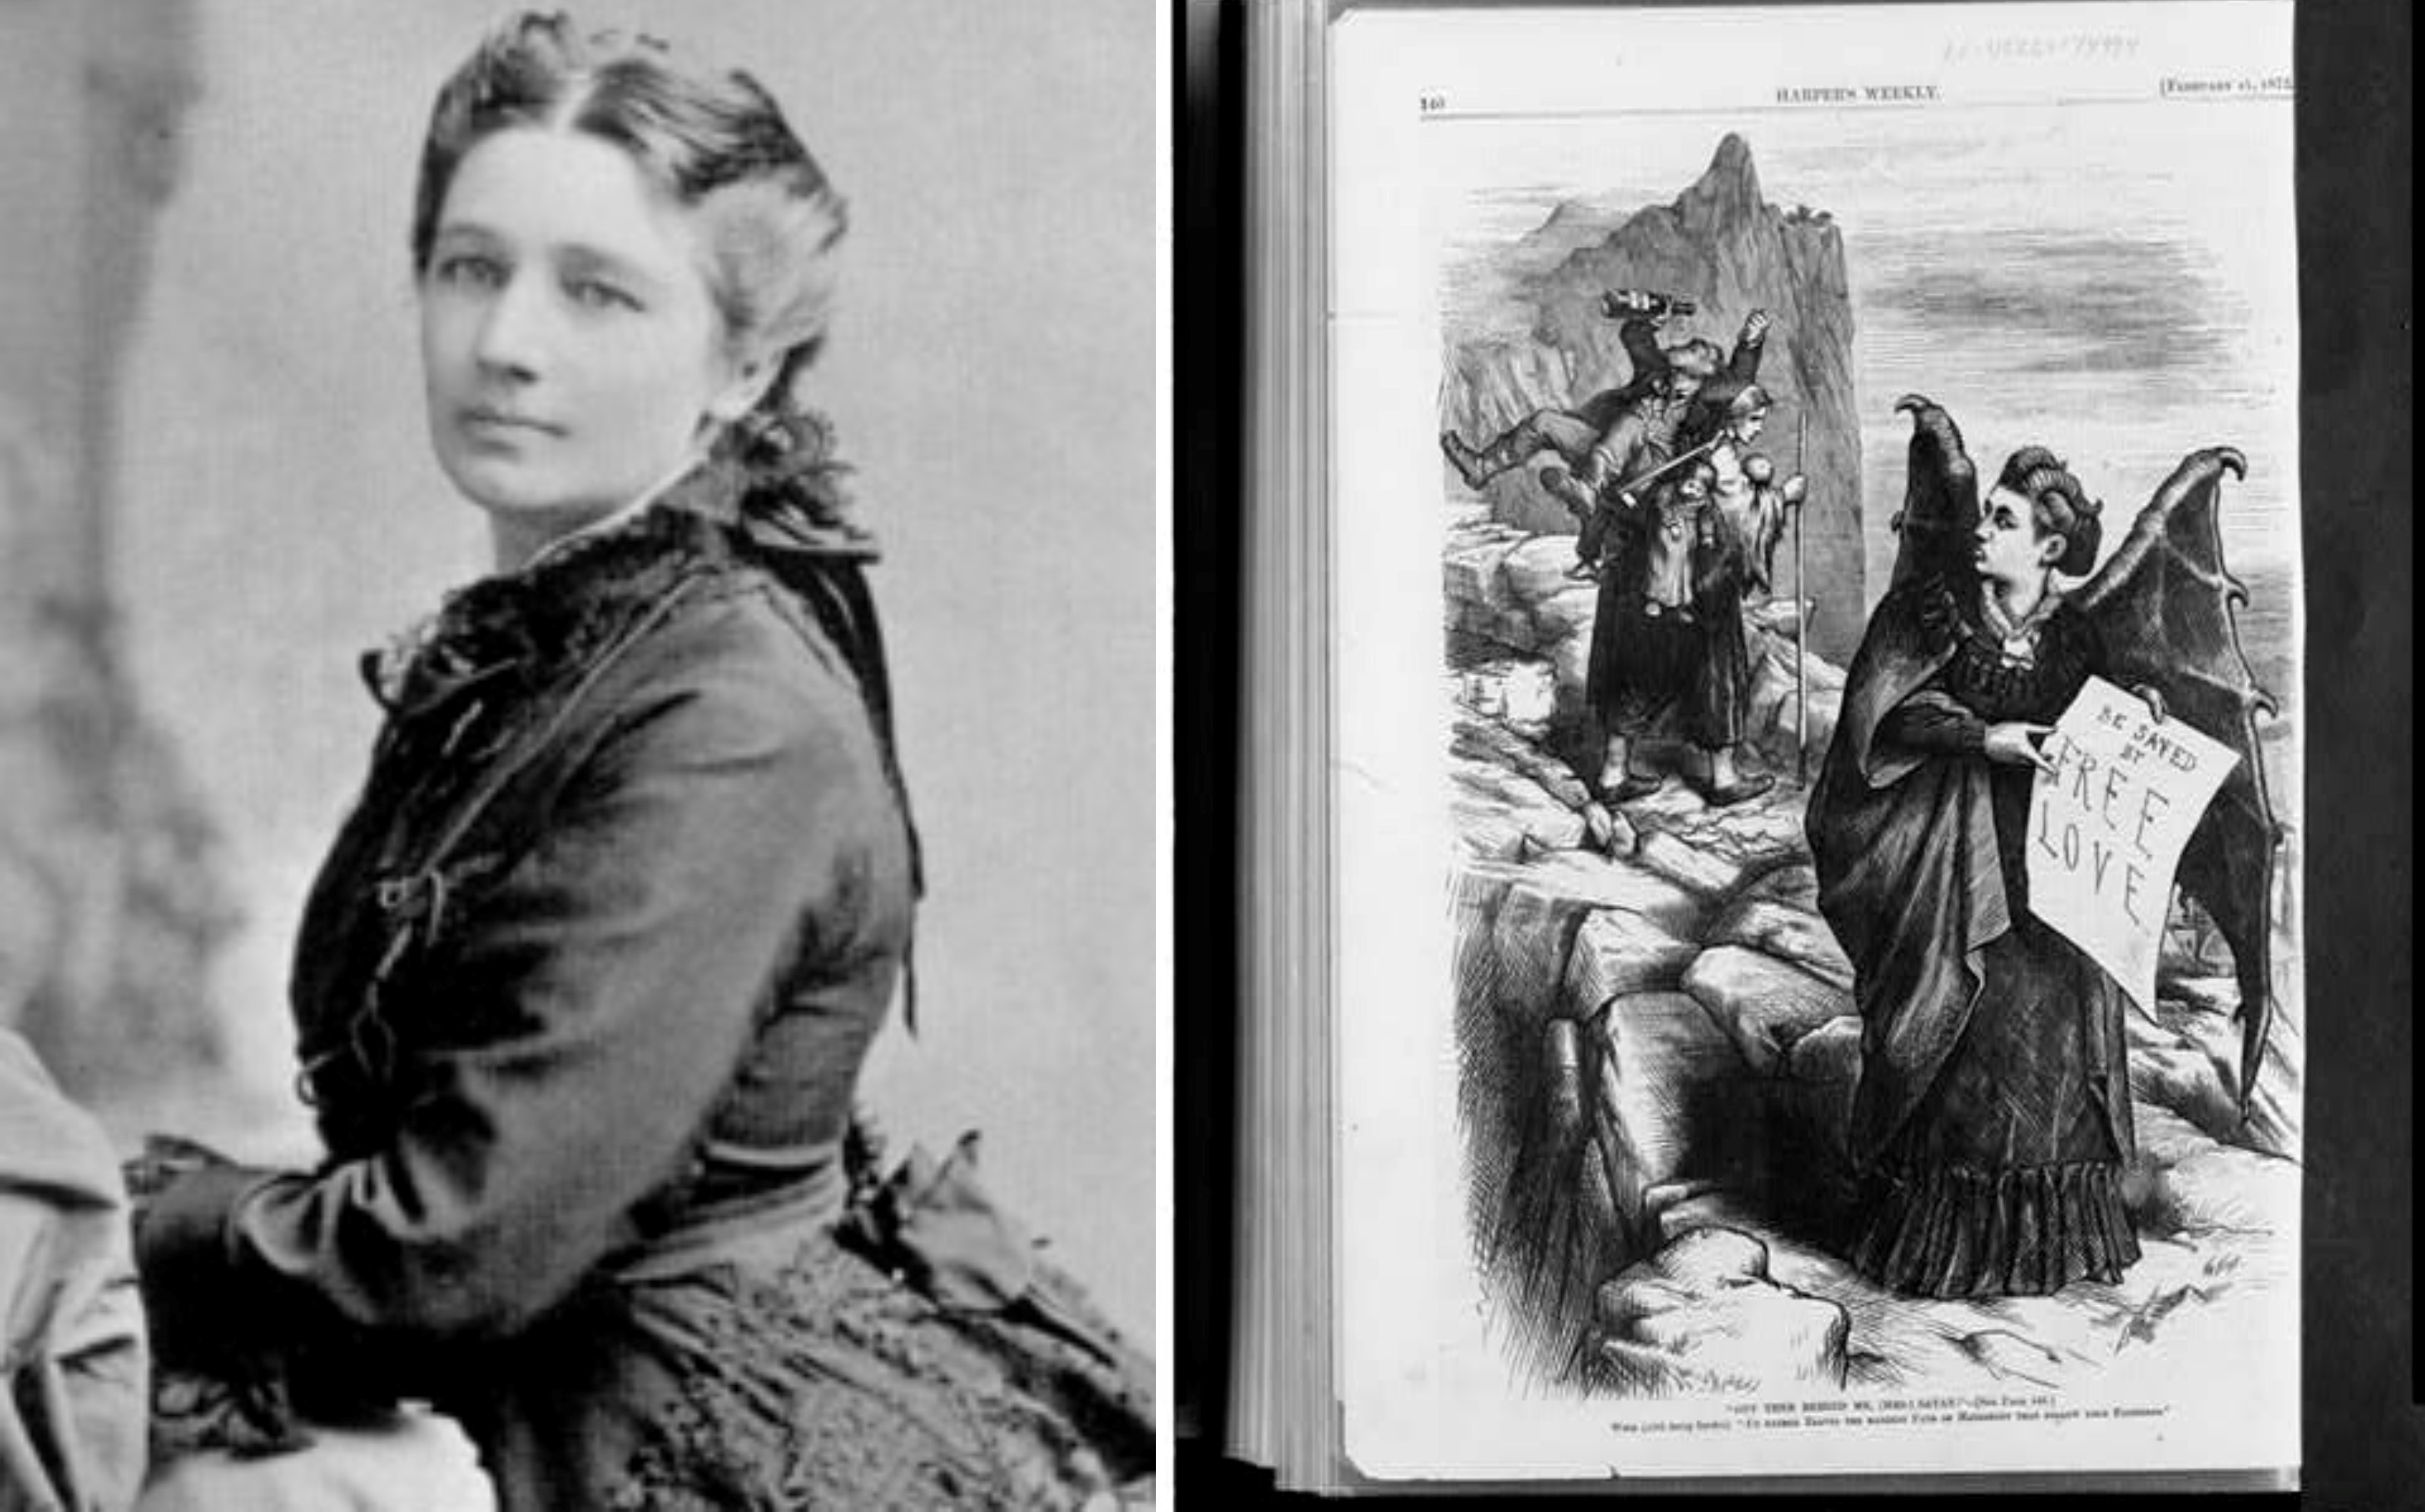 On the left, Victoria Clafin Woodhull. On the right, Harper’s Weekly cartoon depicting Woodhull in 1872.